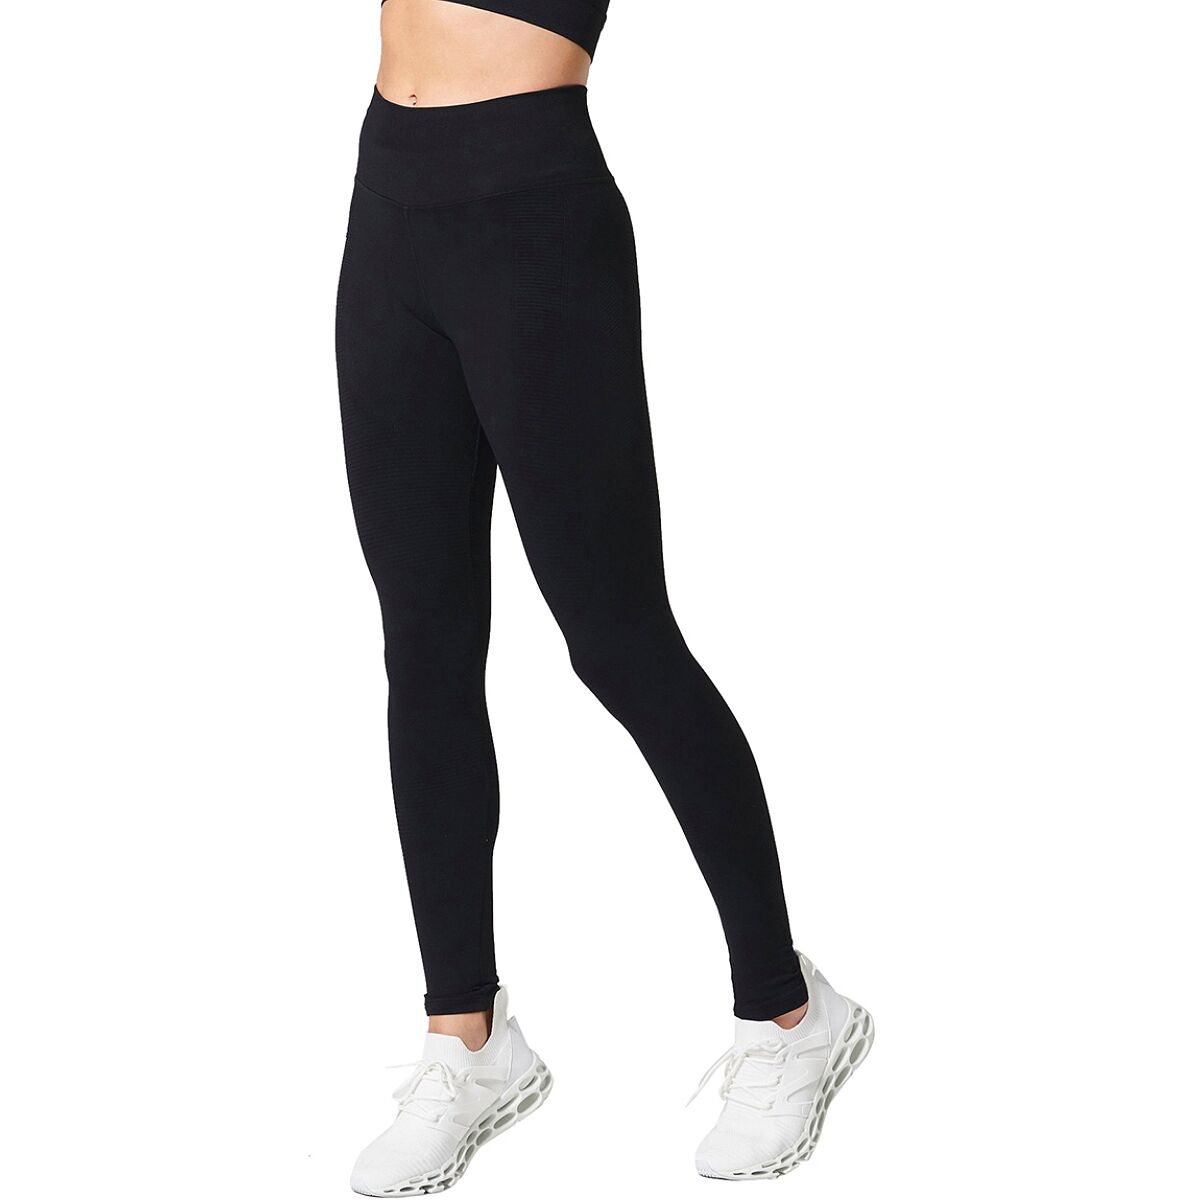 NUX One By One Legging - Women's